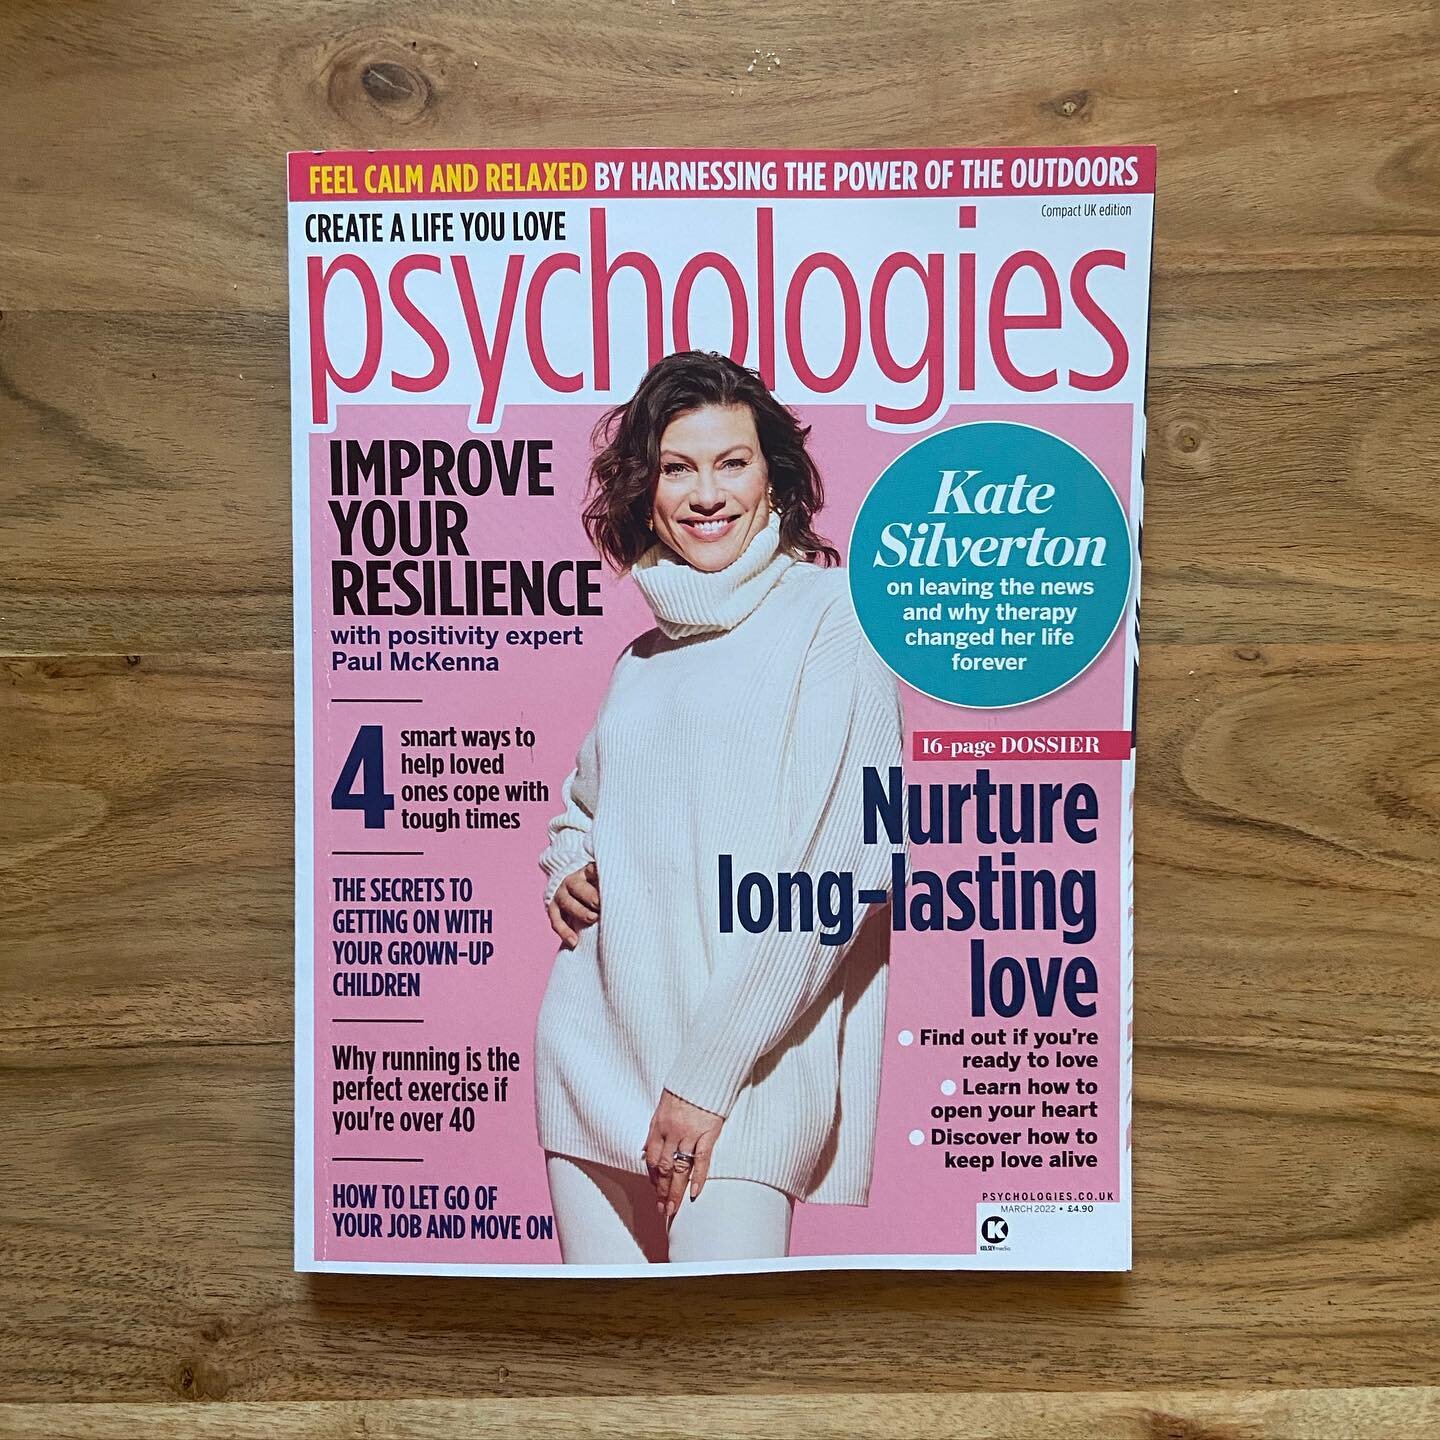 Starting the year with my first commission in one of my favourite magazines being published. I actually wrote this piece on ecotherapy for @psychologiesmagazine a few weeks before Elphie was born last summer, inspired by a powerful, empowering ecothe